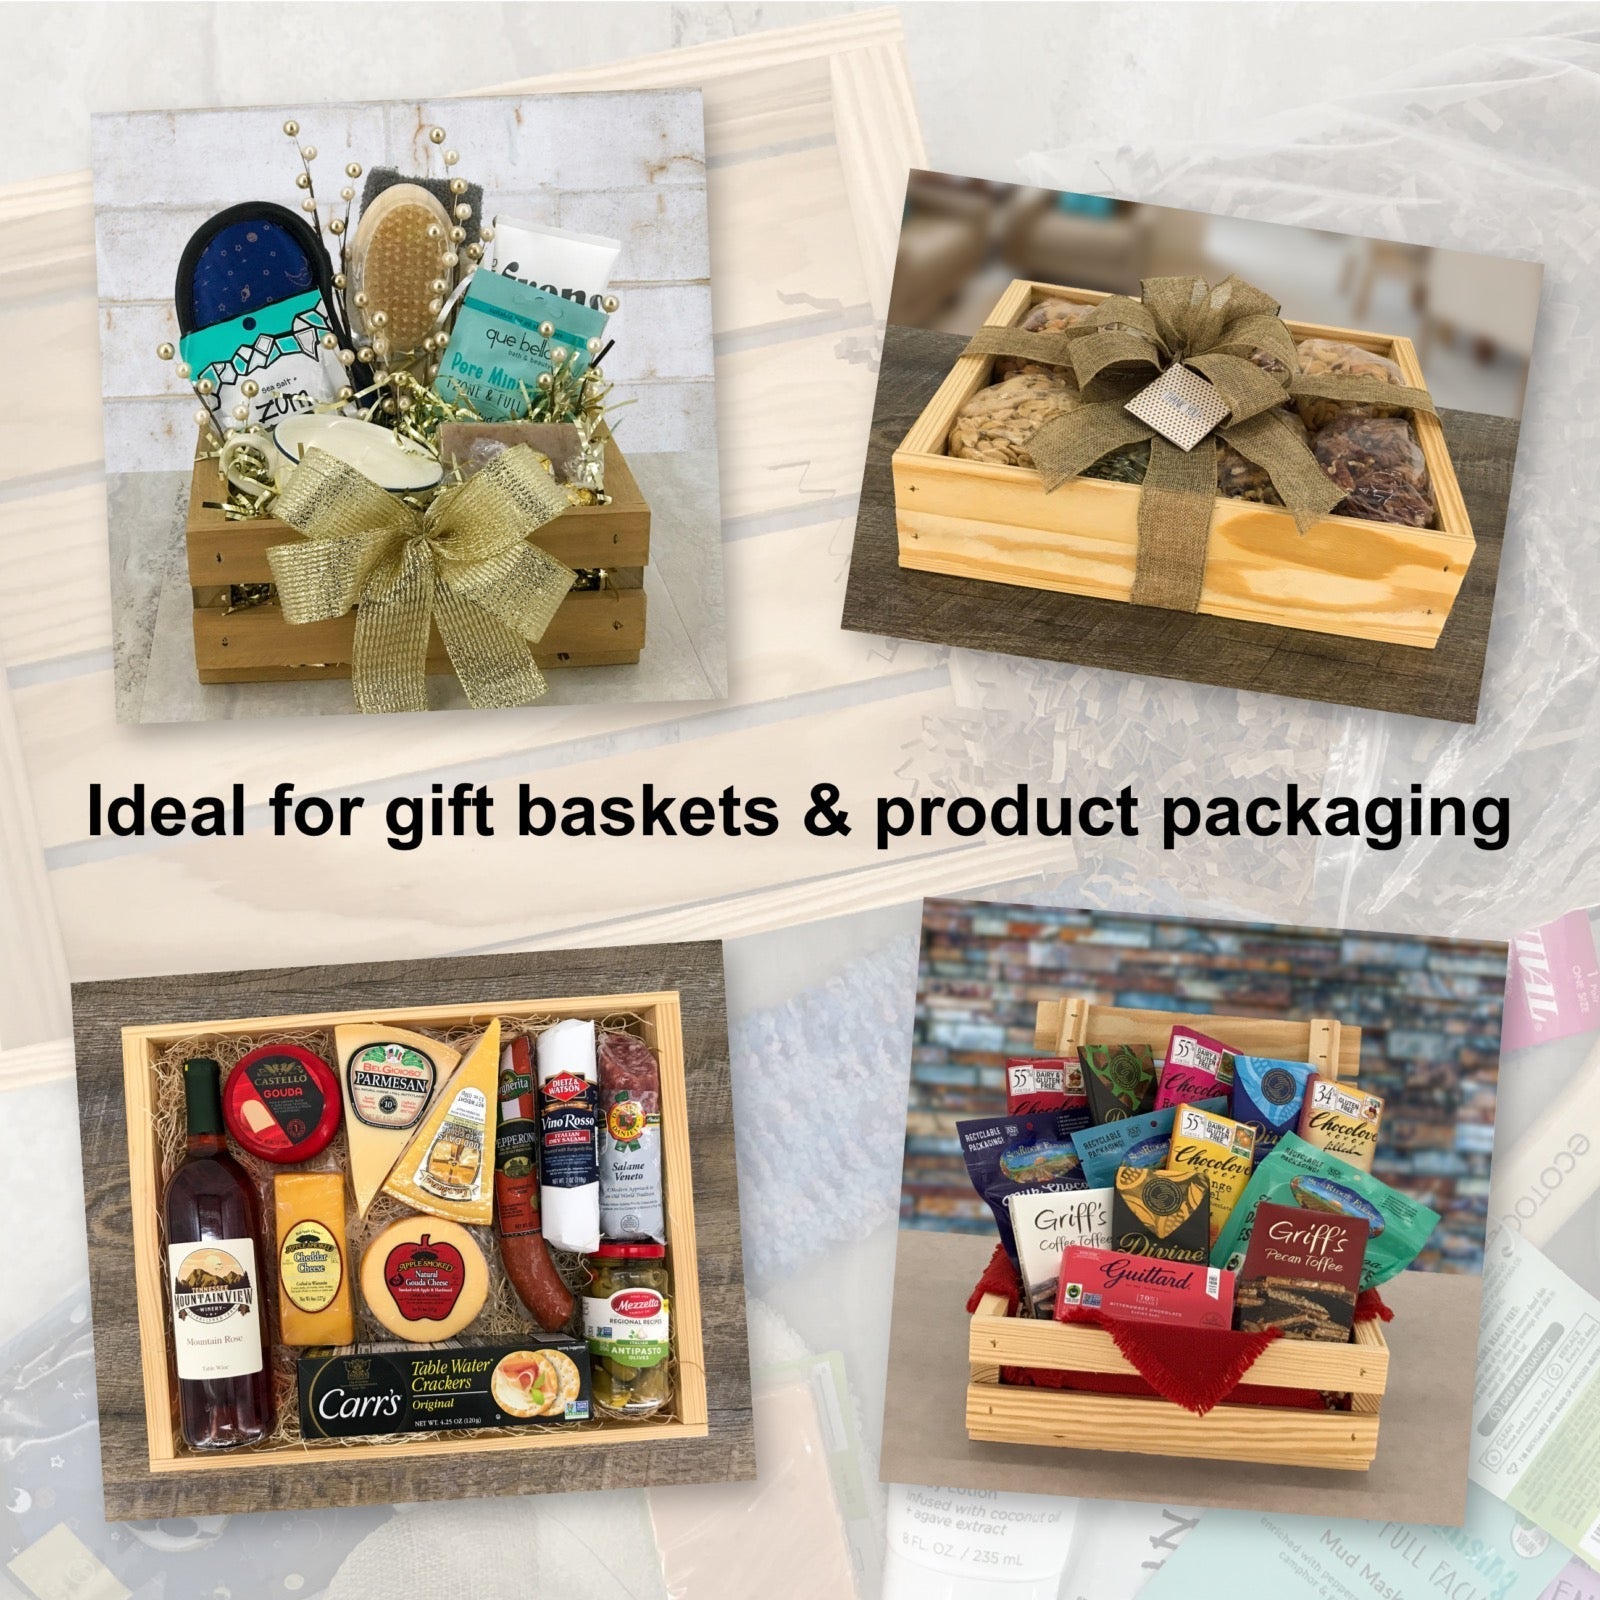 Ideal for gift baskets and product packaging, SS-13-7.5-3.5-ST-NW-NL, 6-SS-13-7.5-3.5-ST-NW-NL, 12-SS-13-7.5-3.5-ST-NW-NL, 24-SS-13-7.5-3.5-ST-NW-NL, 48-SS-13-7.5-3.5-ST-NW-NL, 96-SS-13-7.5-3.5-ST-NW-NL